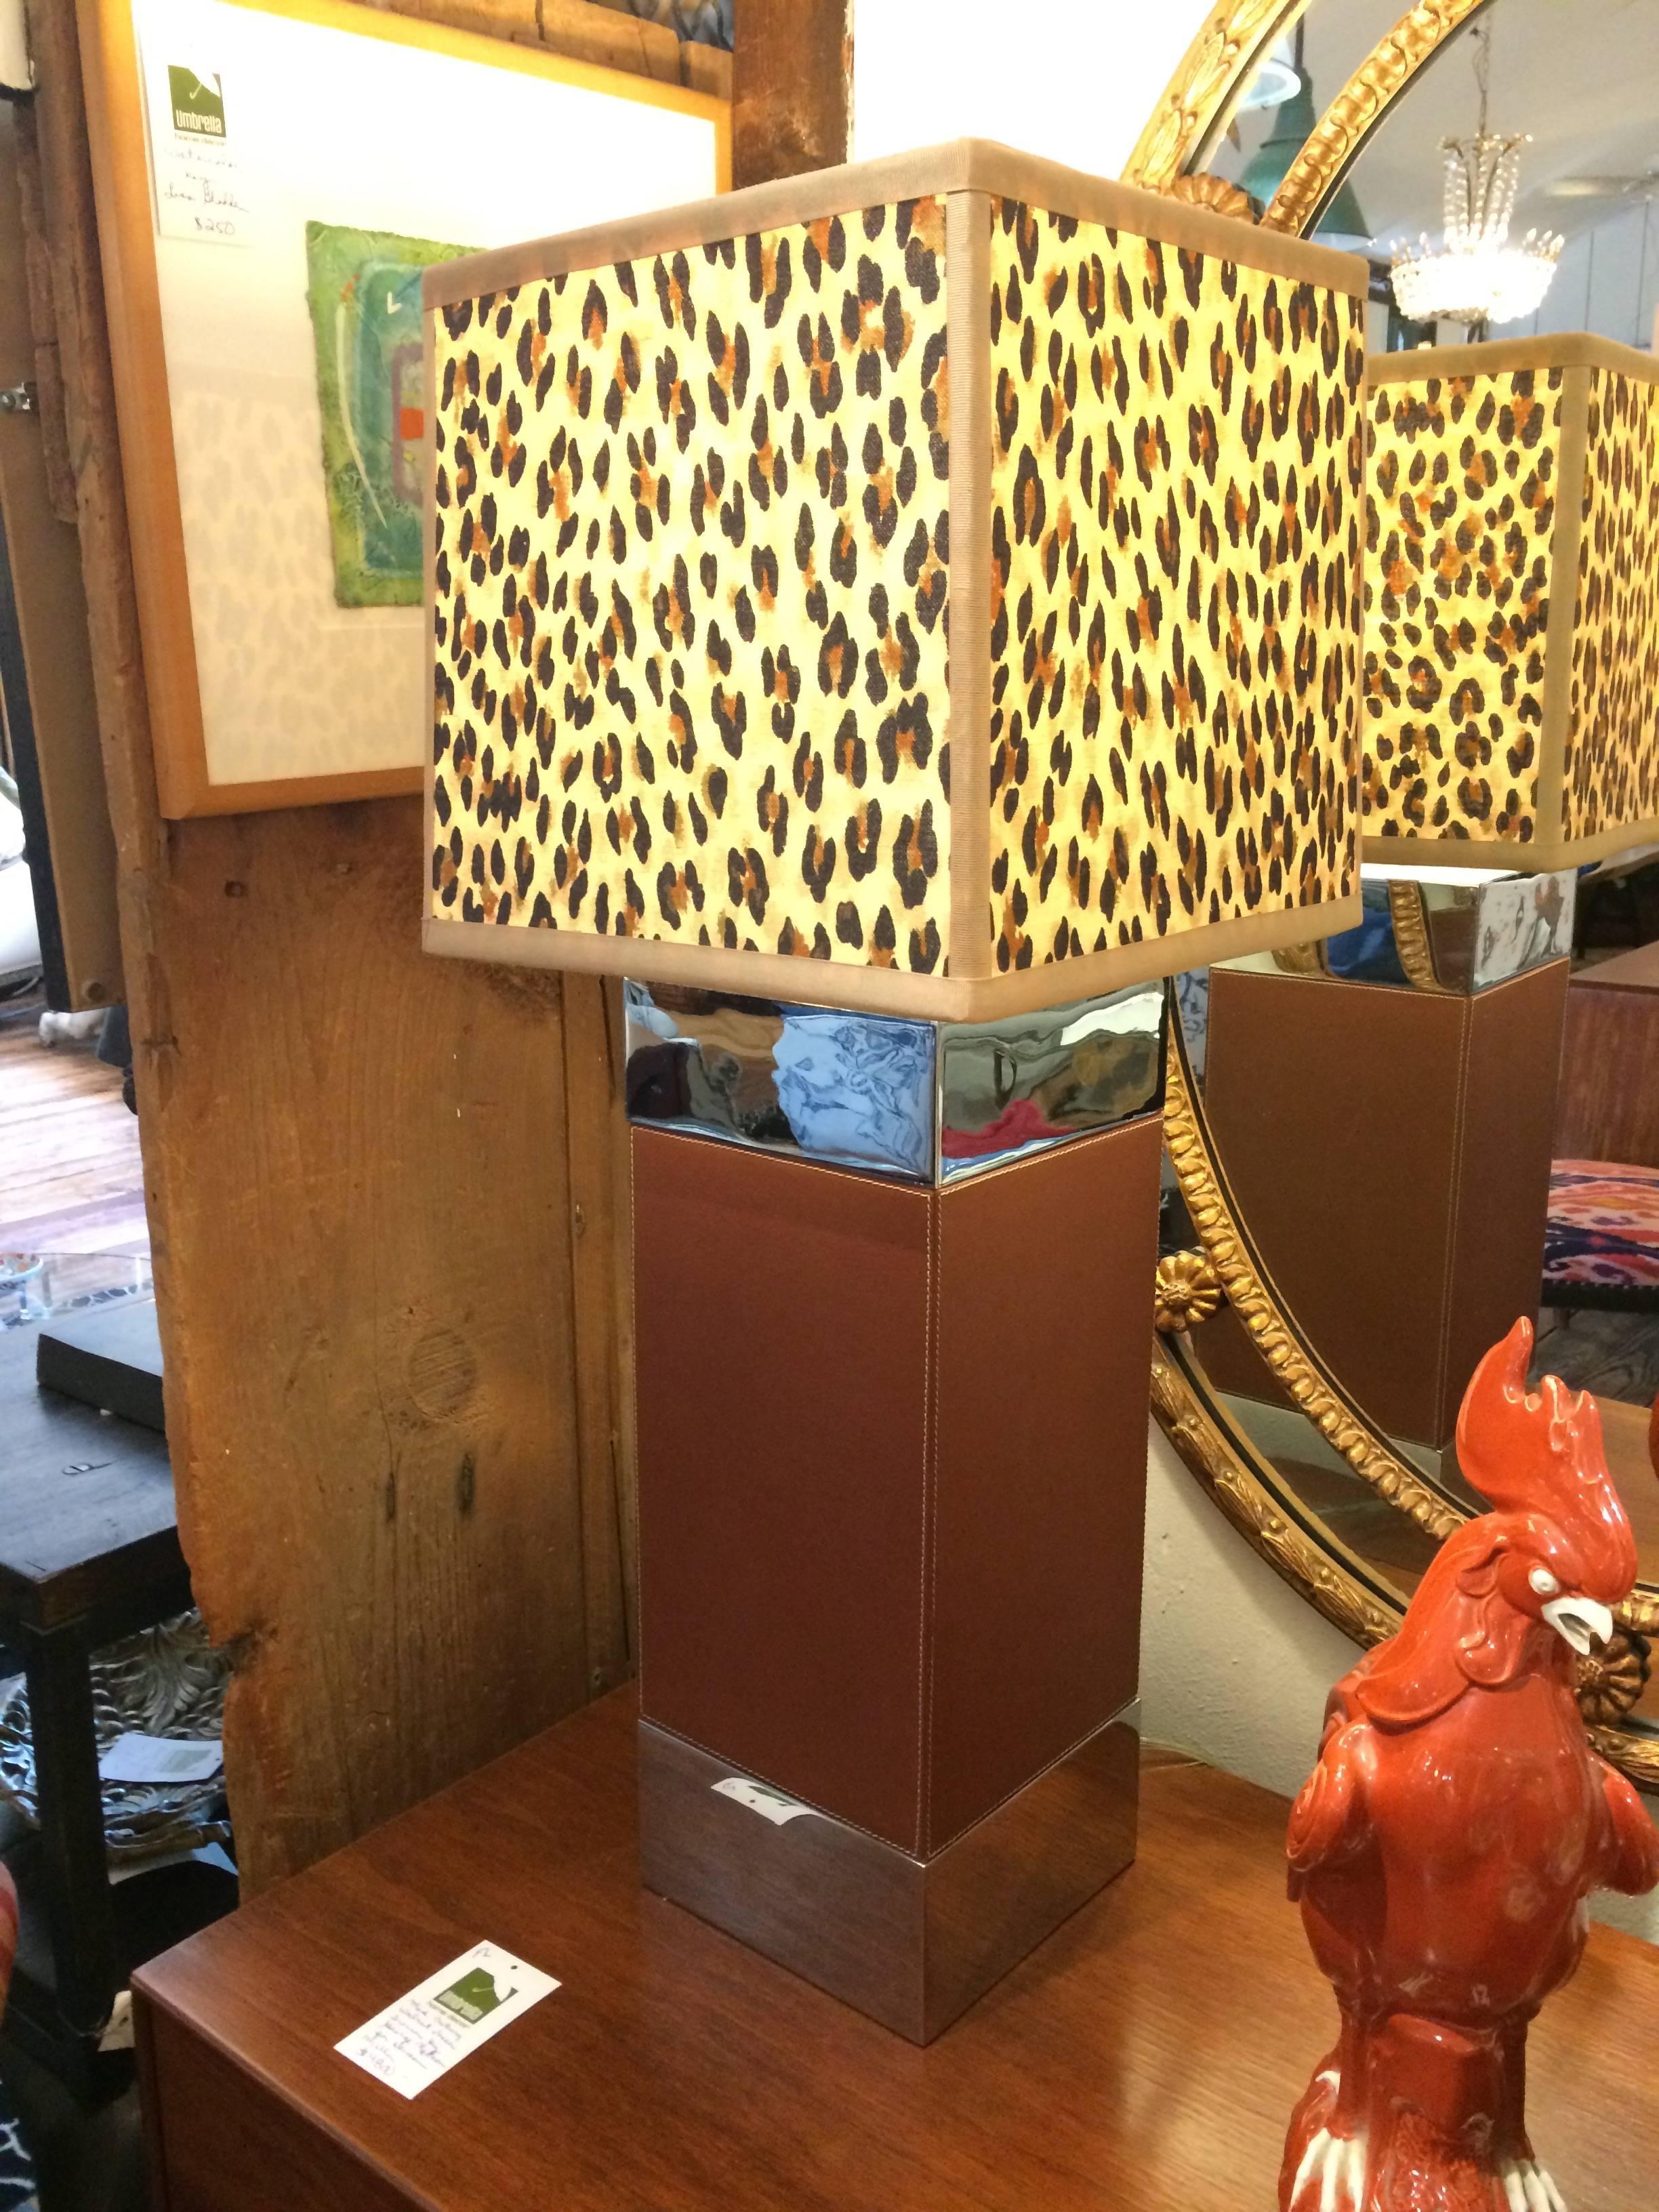 A very rich looking designer pair of table lamps having square leather clad bases with chrome detailing and visible handsome tan stitching, topped off with Mary McCarty handmade animal fabric shades.
Column of lamp is 7 inches square.